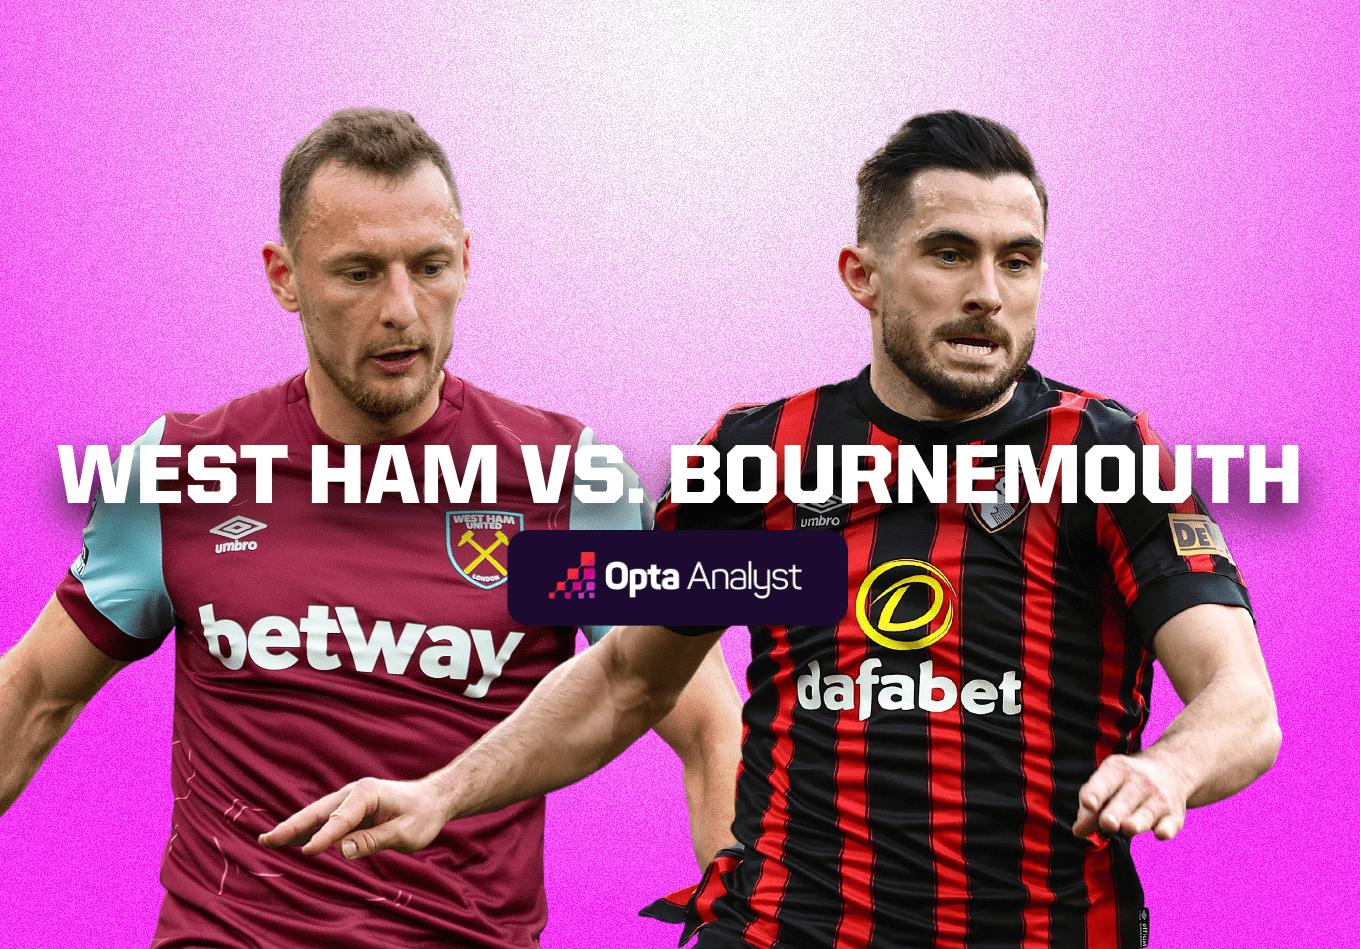 West Ham vs Bournemouth: Prediction and Preview